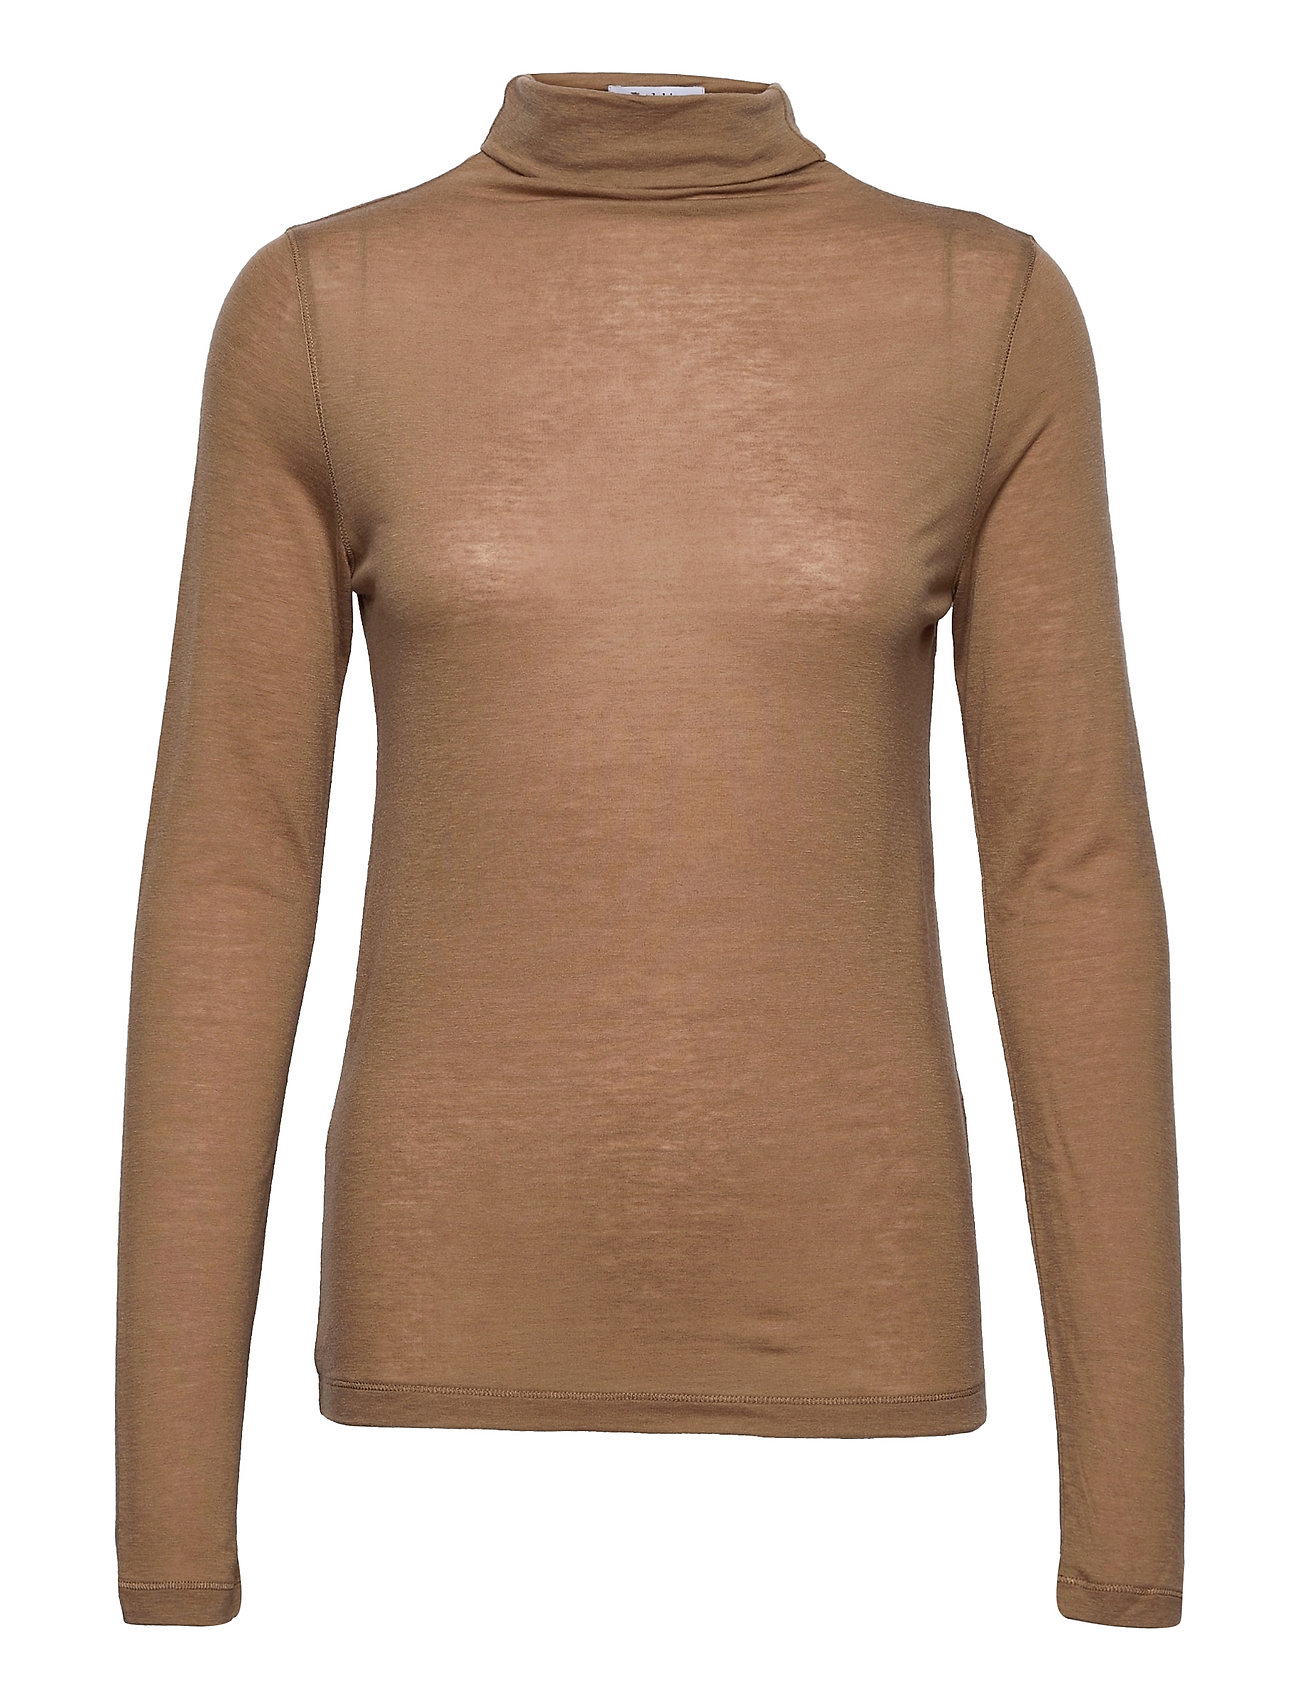 Rodebjer Kena T-shirts & Tops Long-sleeved Beige RODEBJER